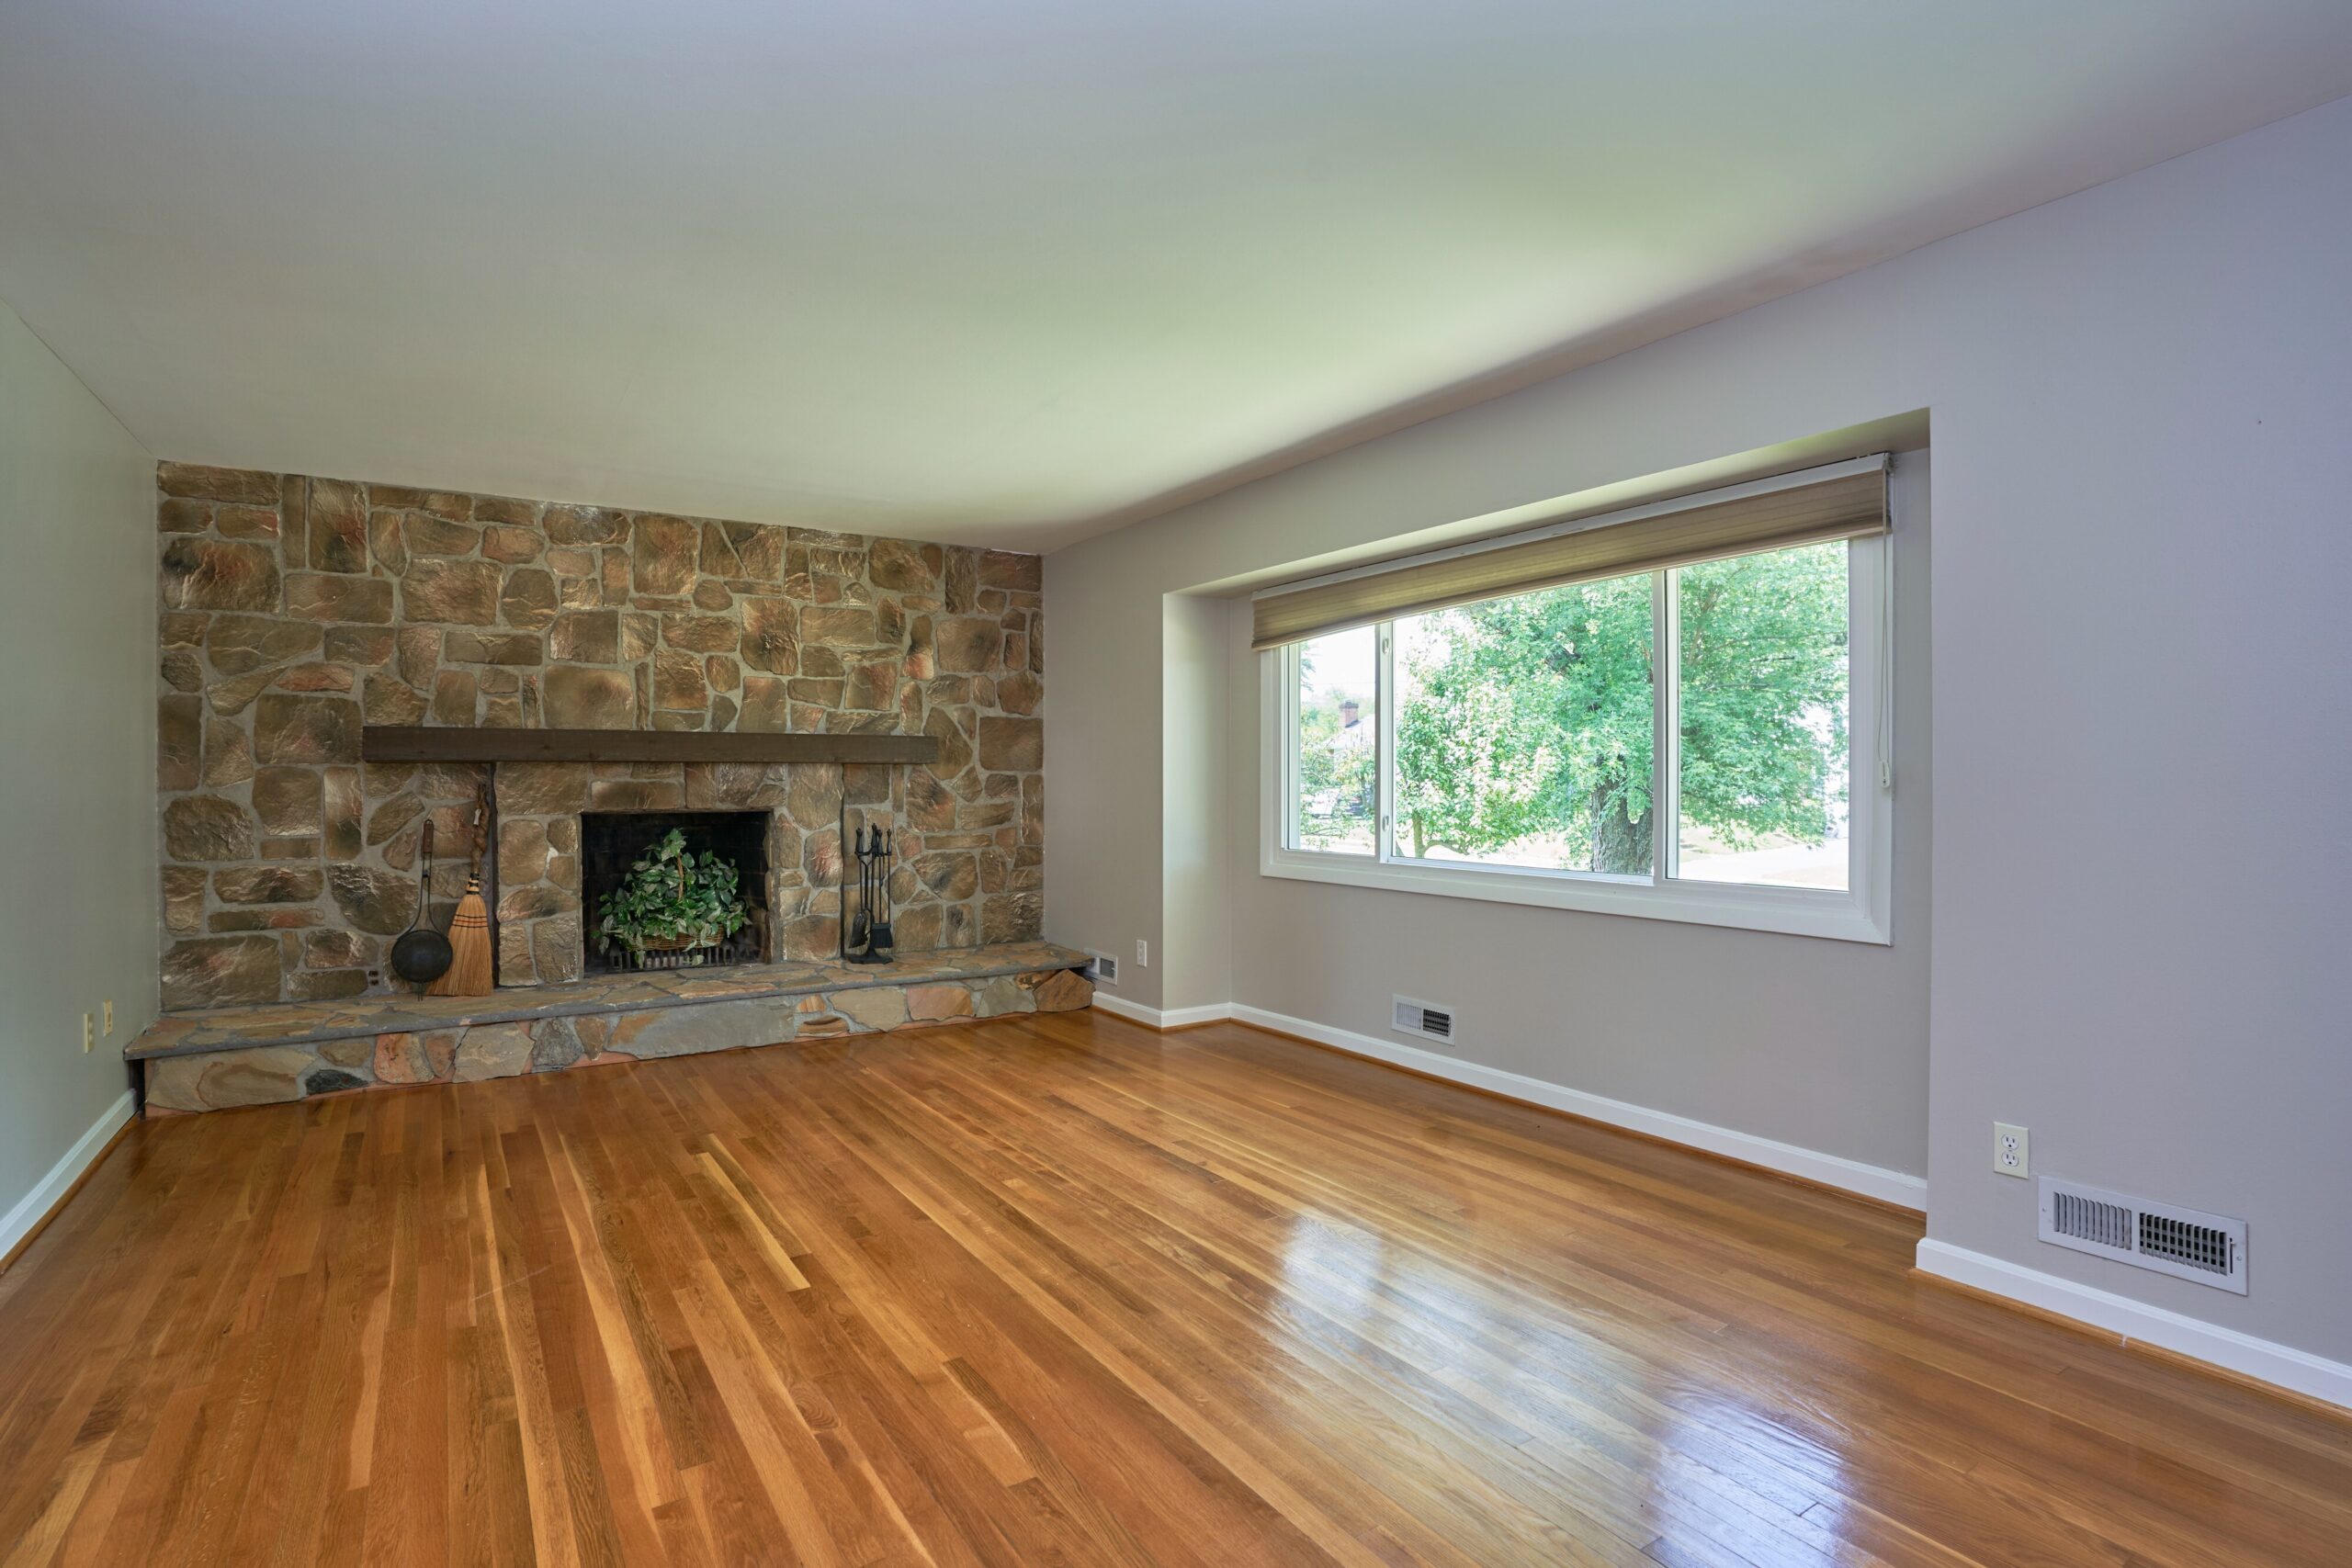 Professional interior photo of 5803 Sable Drive, Alexandria, VA - showing the formal living room with fireplace built into wall to wall stone. hardwood floors